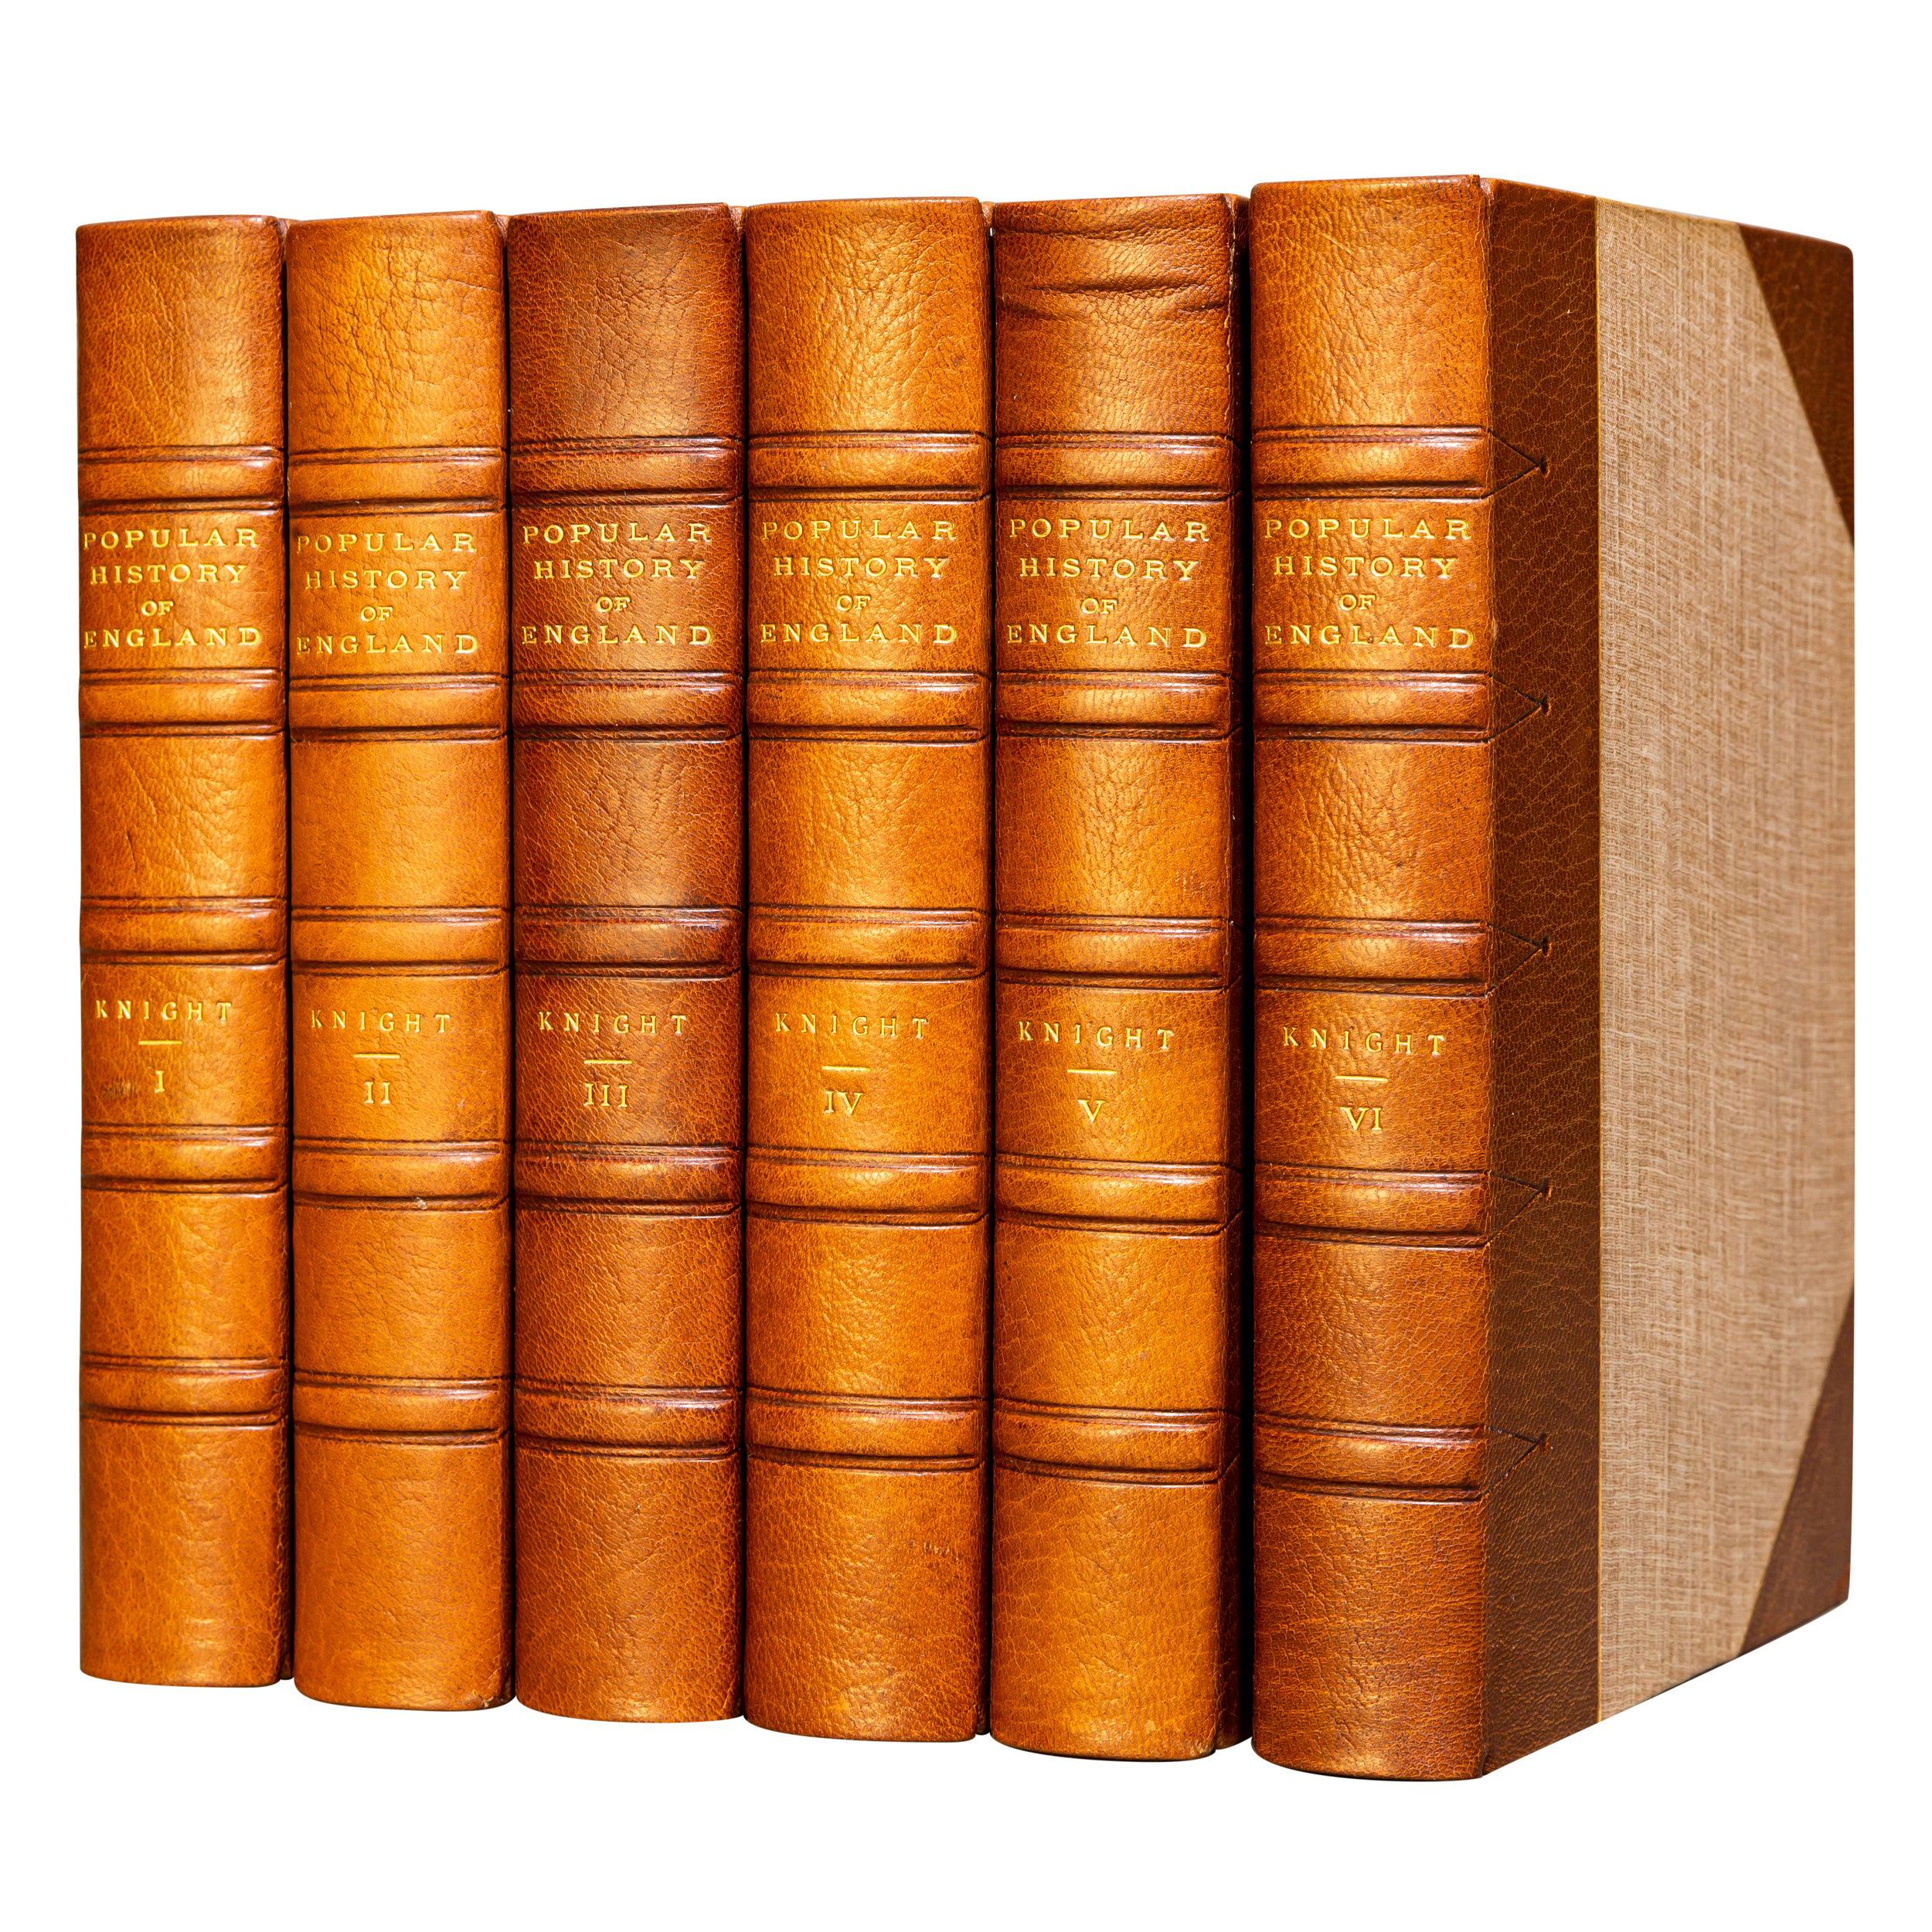 'Book Sets', 8 Volumes, Charles Knight, The Popular History Of England